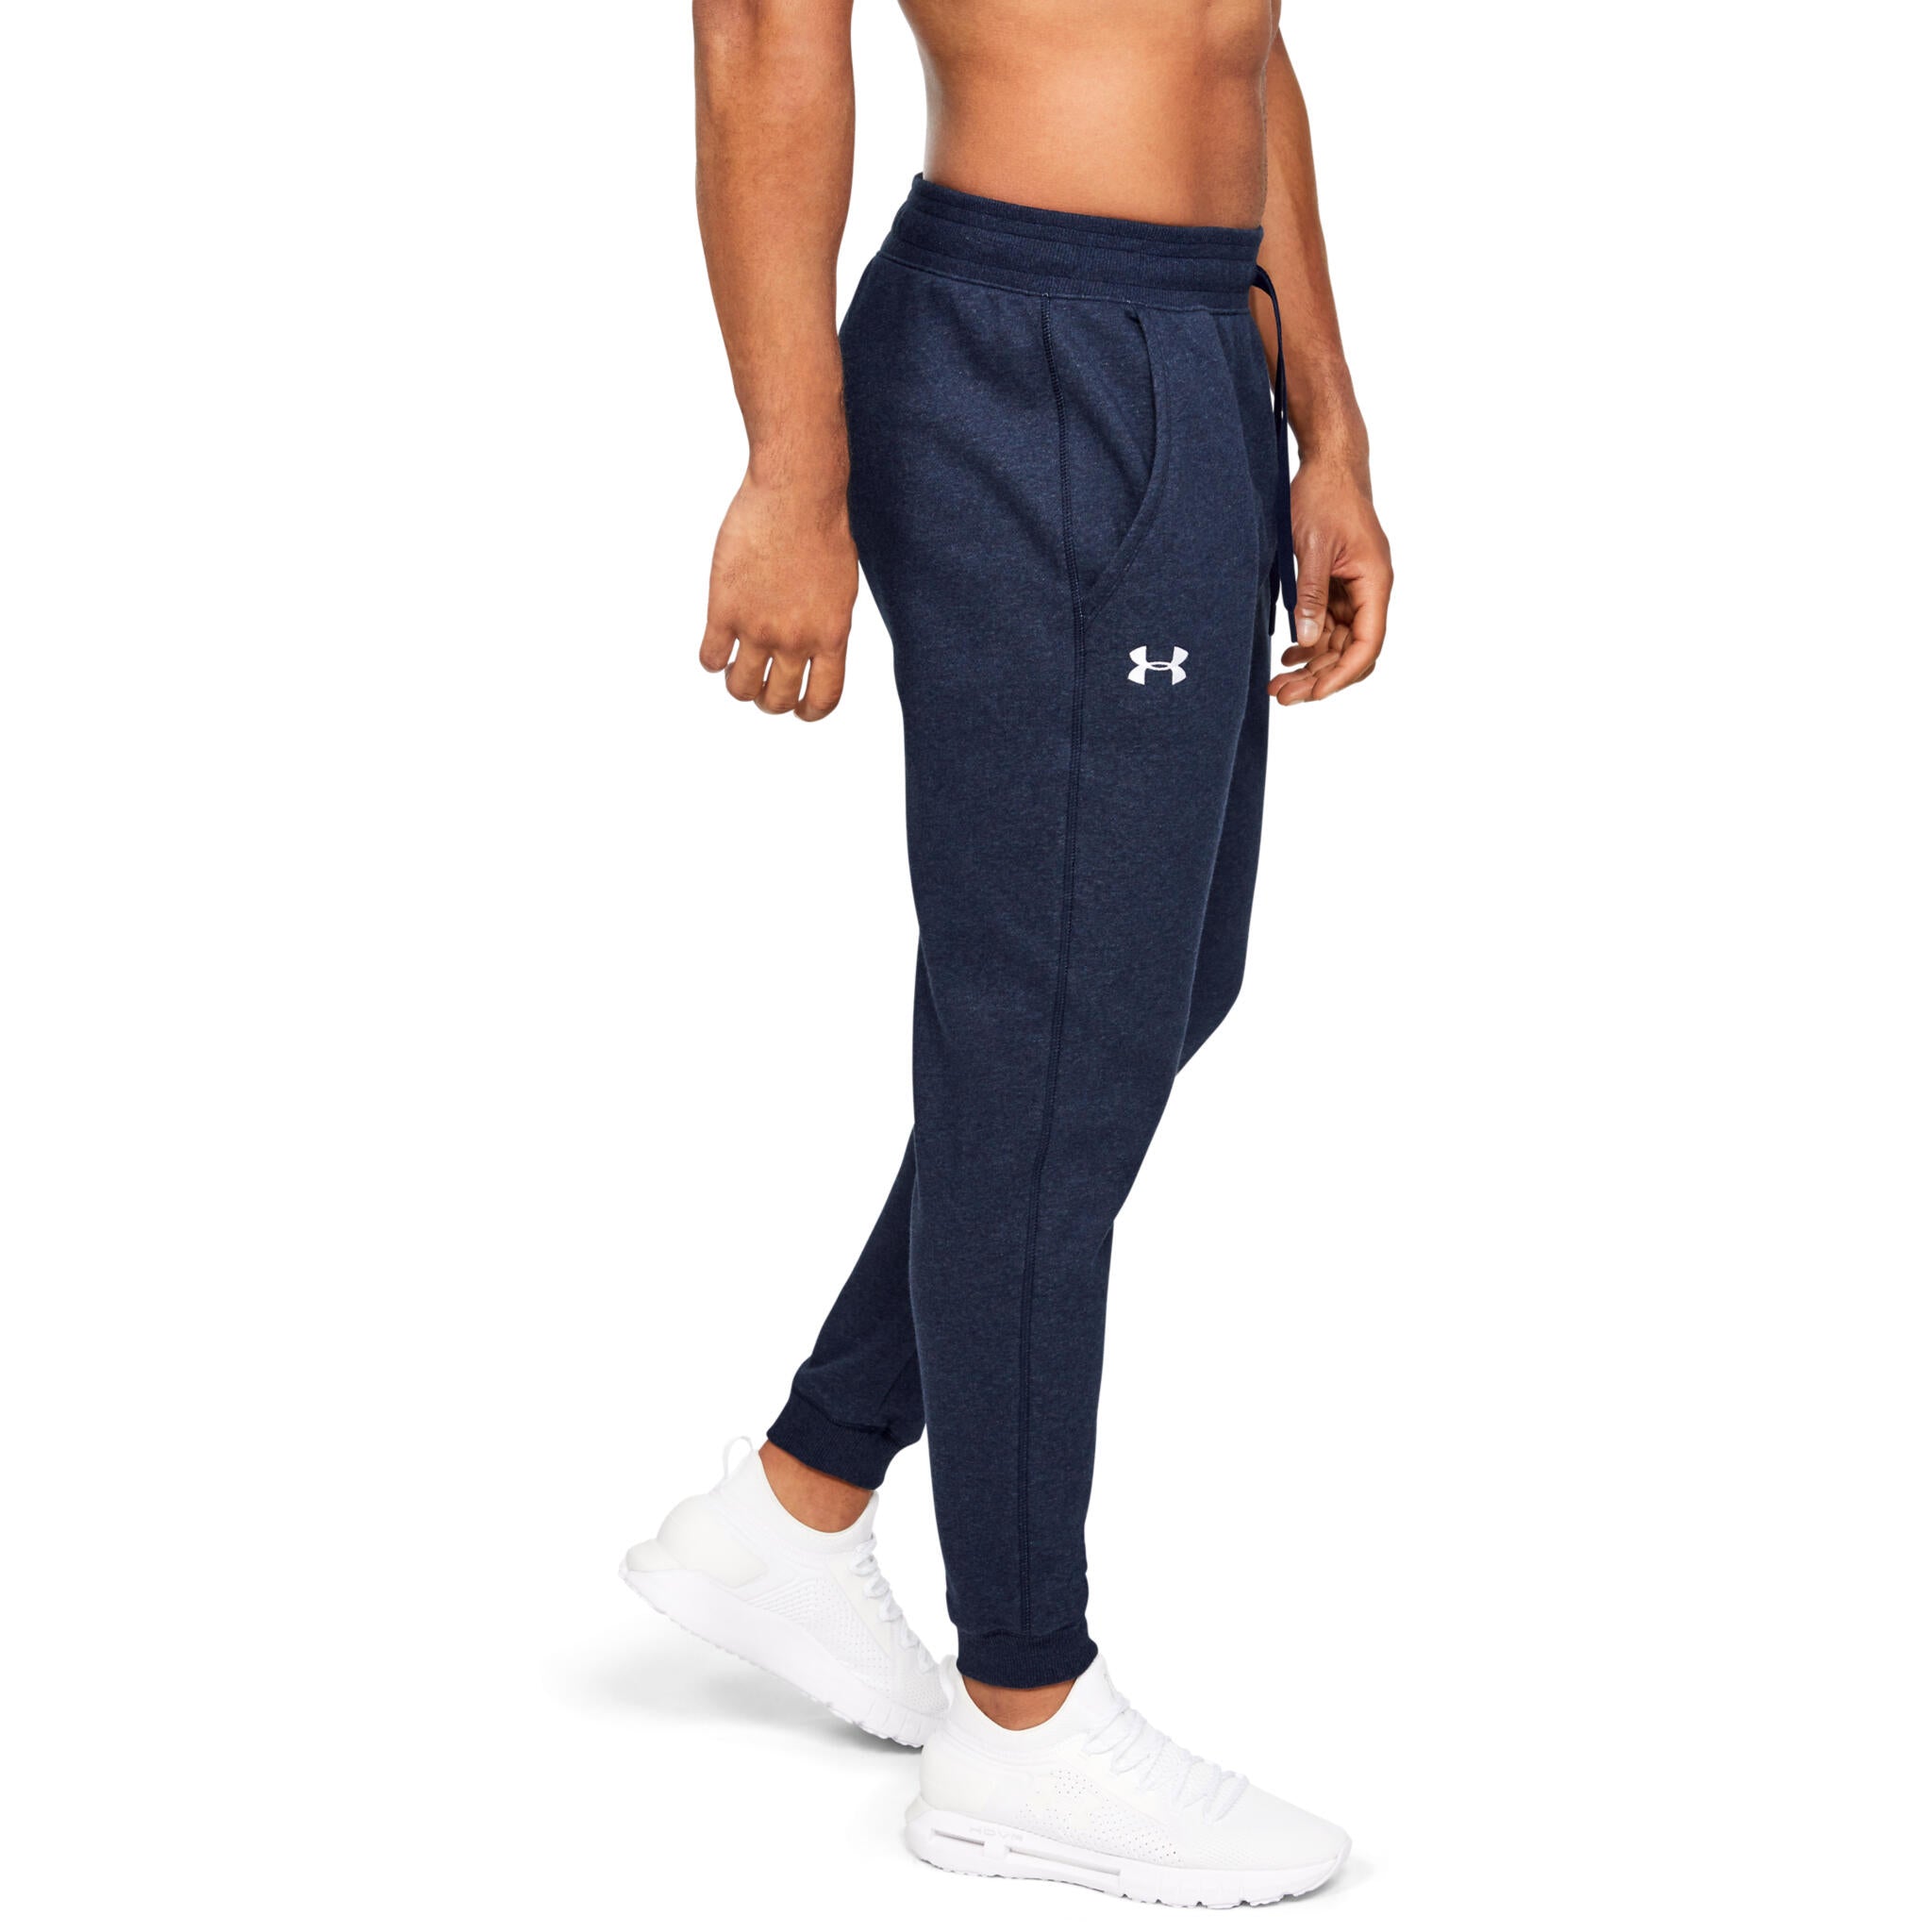  Under Armour Men's Hustle Fleece Pants, Gray, X-Small :  Clothing, Shoes & Jewelry